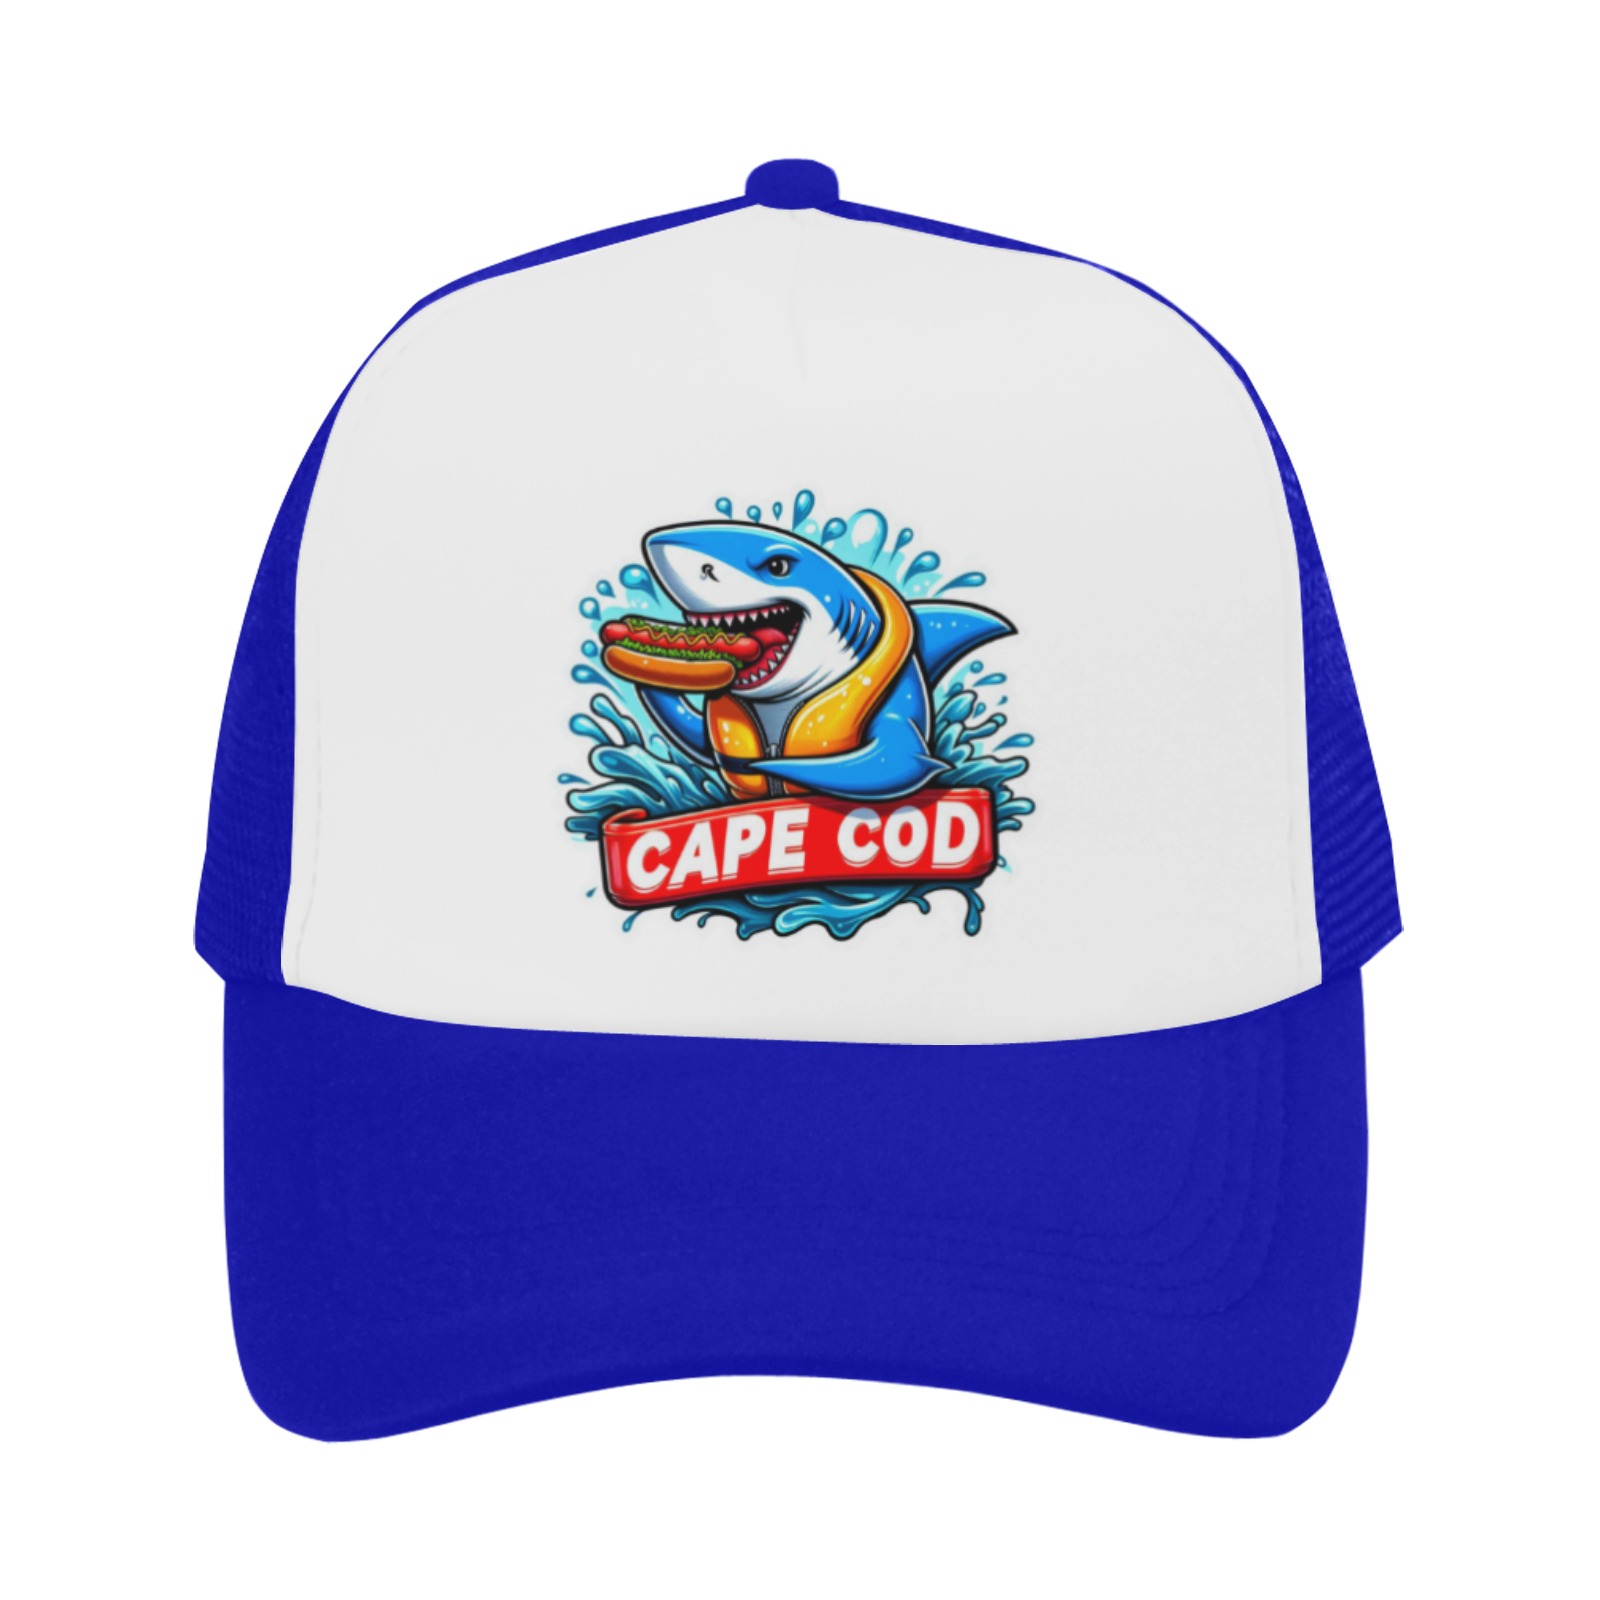 CAPE COD-GREAT WHITE EATING HOT DOG 3 Trucker Hat